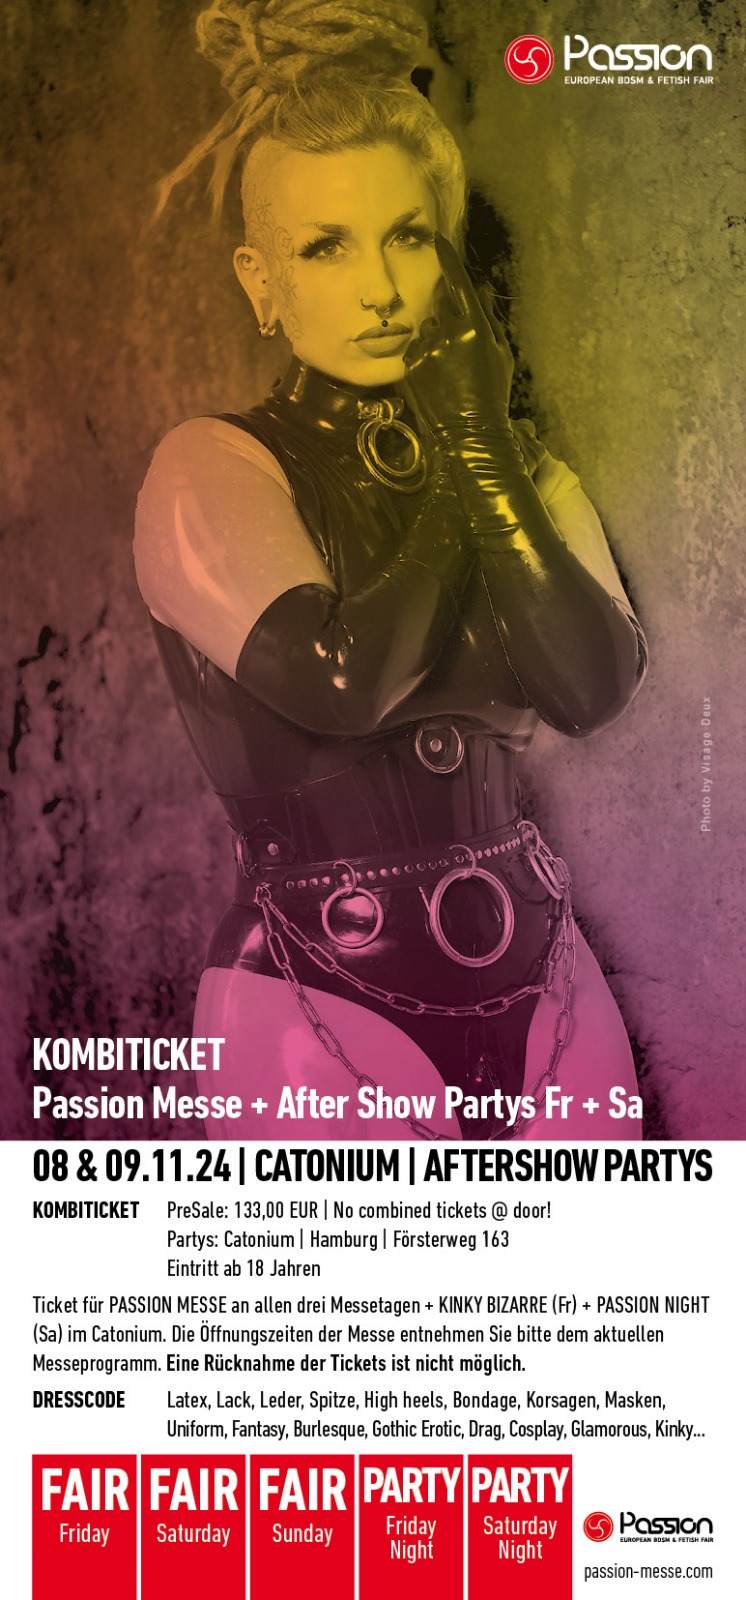 Passion Messe - Kombiticket 3-Tages-Messeticket + Passion Night + Kinky Bizarre